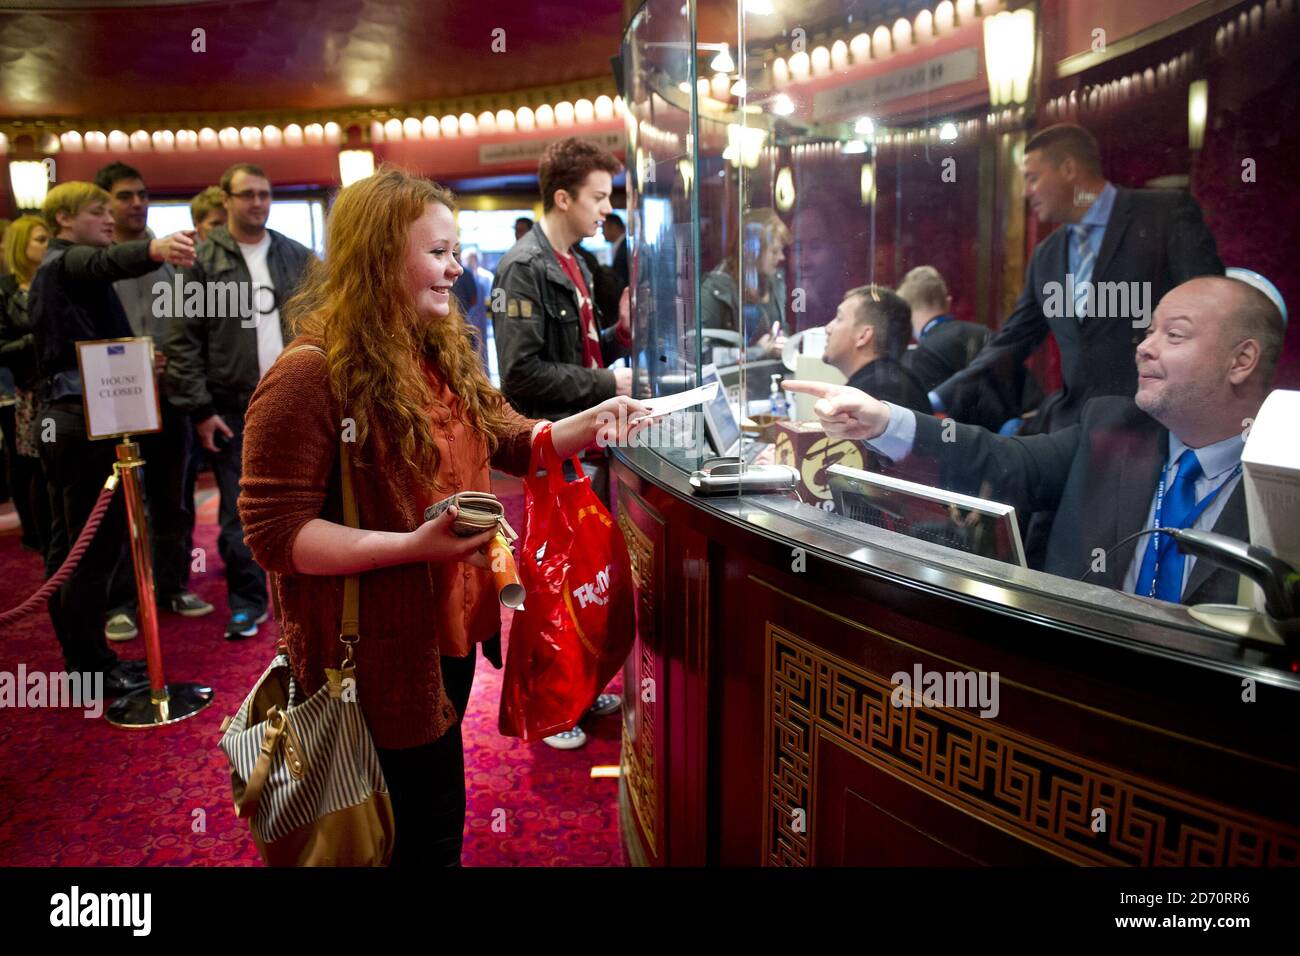 Charlotte Thompson from Solihull buys tickets for Miss Saigon, at the Prince Edward theatre in central London. Tickets for the show (opening May 2014) went on sale at 10am today, and sales set a new record for the largest single day of sales in West End and Broadway history. Stock Photo